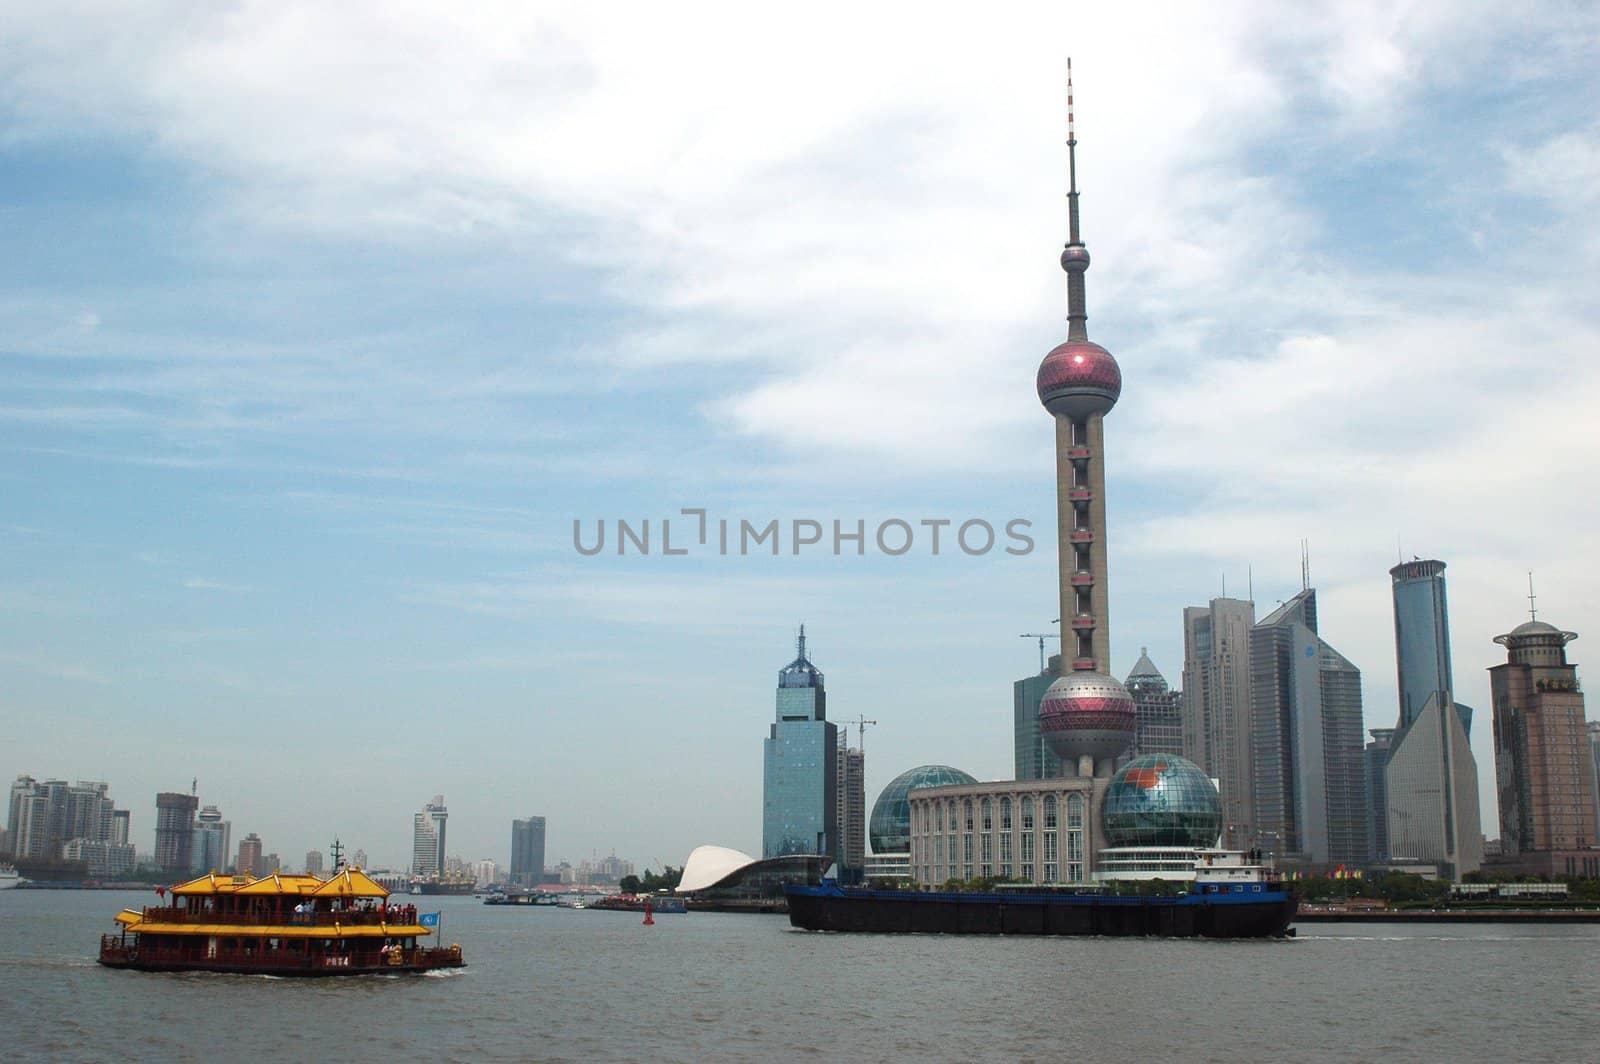 China, Shanghai - general city view, Orient Pearl TV tower, moderns skyscrapers and traditional Chinese ship.